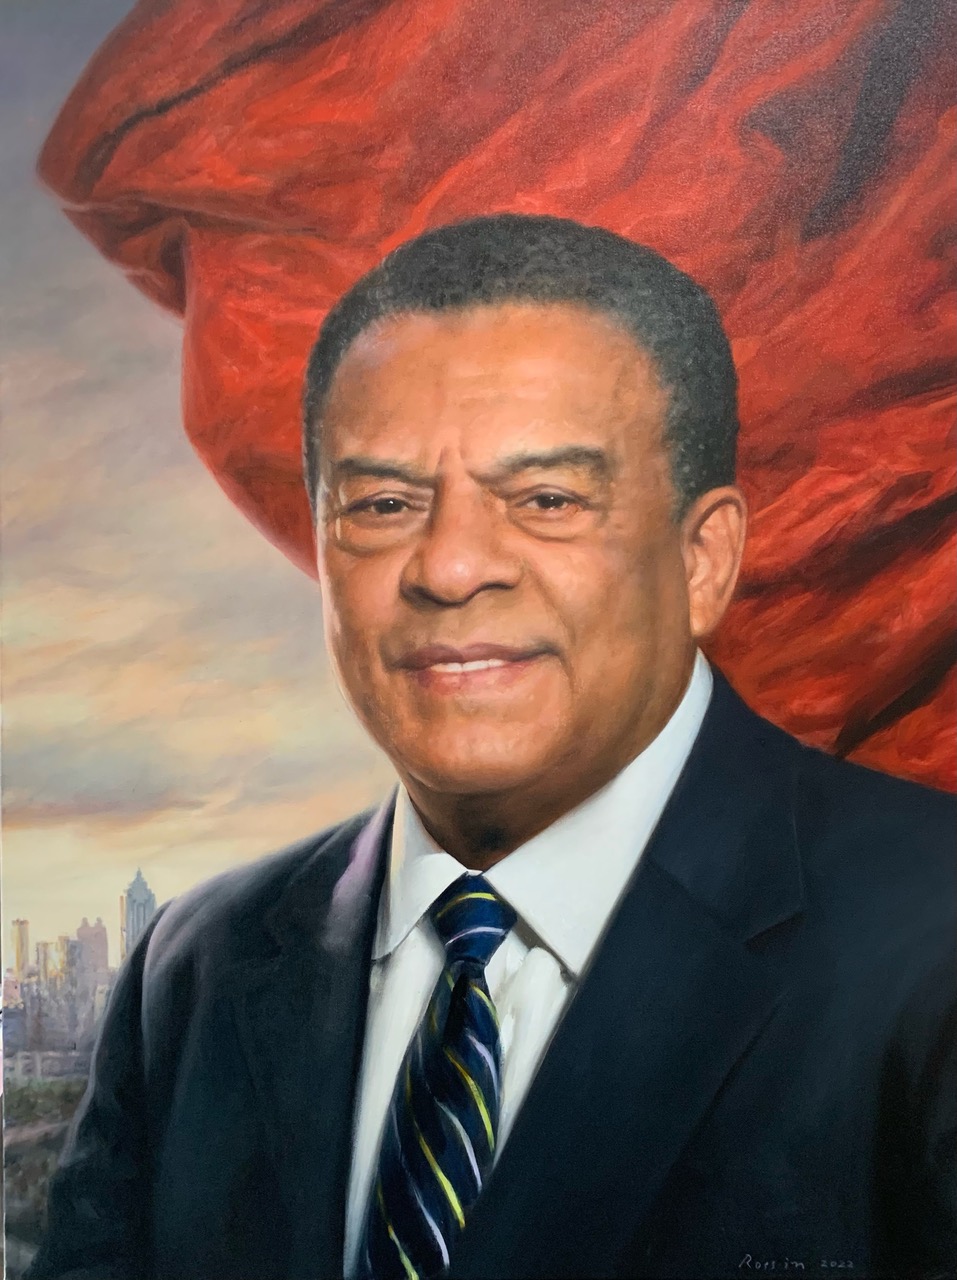 Ross Rossin Portrait Artist in Atlanta's Oil Painting of Ambassador Andrew Young- Portraiture in USA